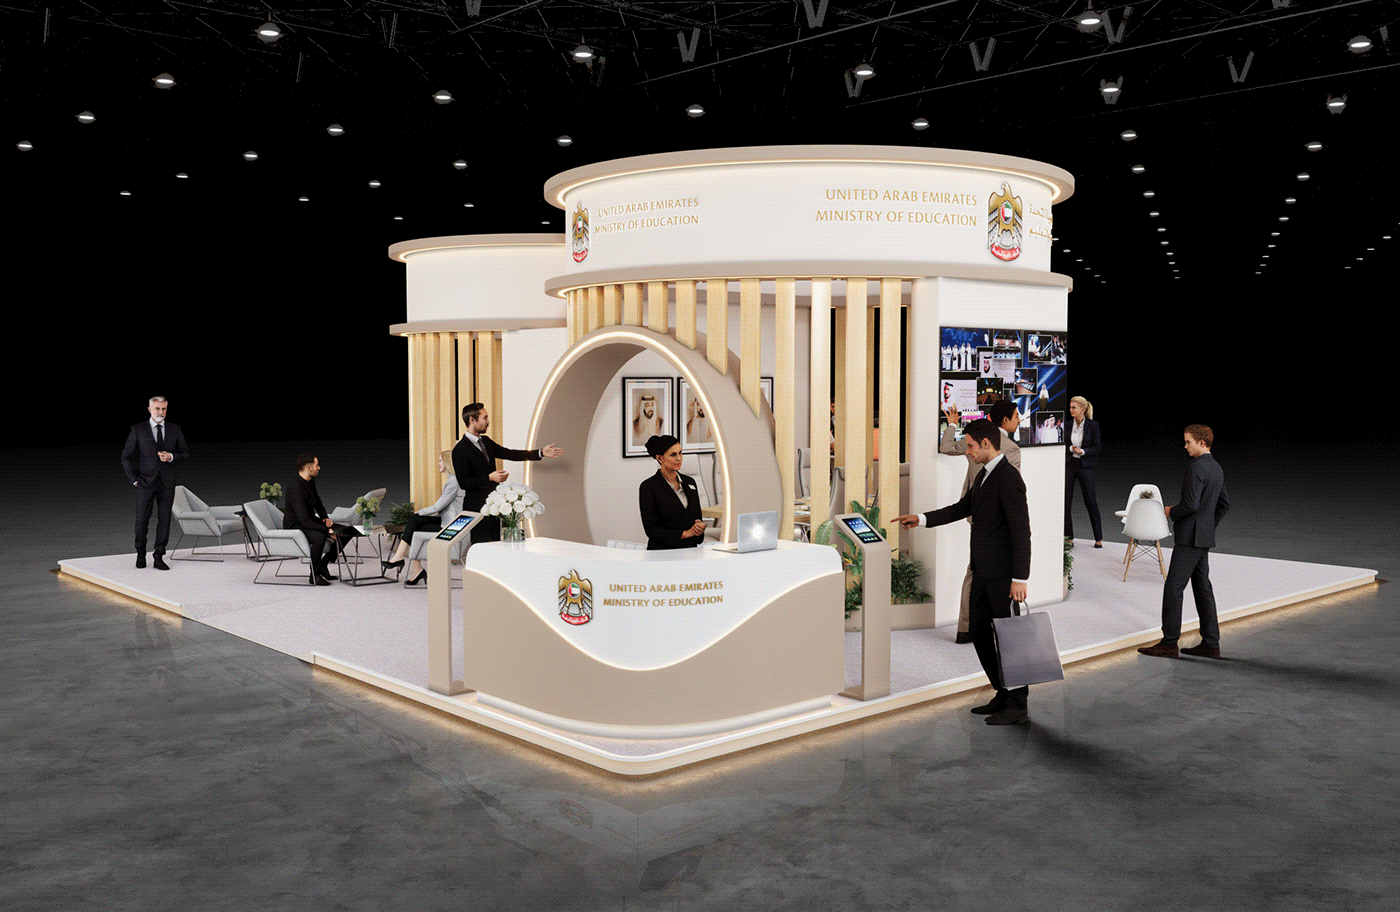 Event Trade Show Exhibition  exhibition stand visualization